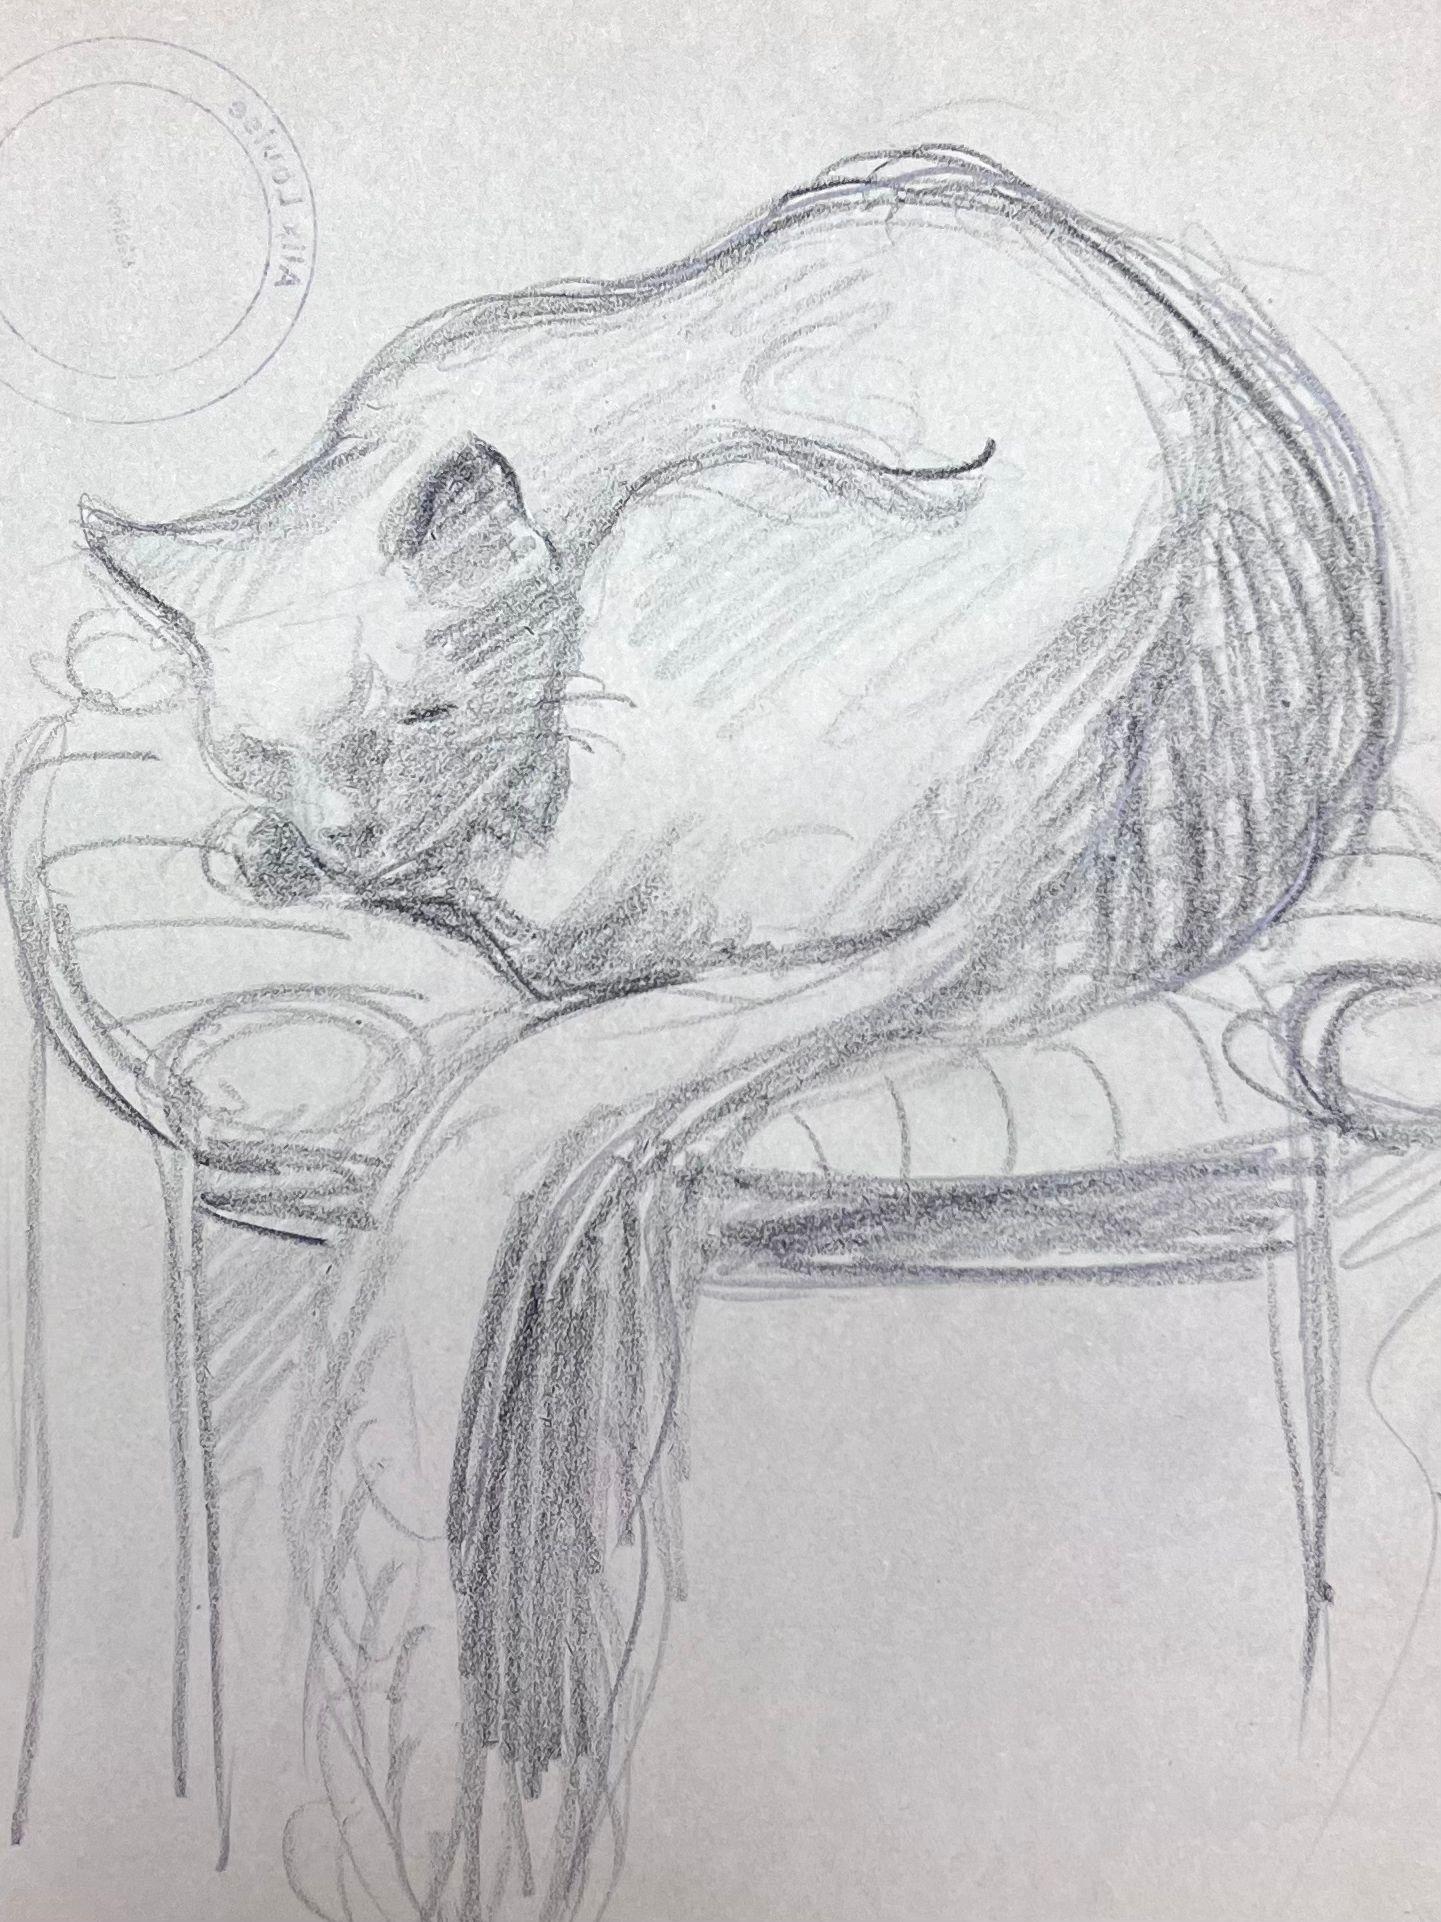 Sleeping Cat
by Louise Alix (French, 1888-1980) *see notes below
provenance stamp to the back 
pencil drawing on artist paper, unframed
measures: 10 high by 8 inches wide
condition: overall very good and sound, a few scuffs and marks to the surface